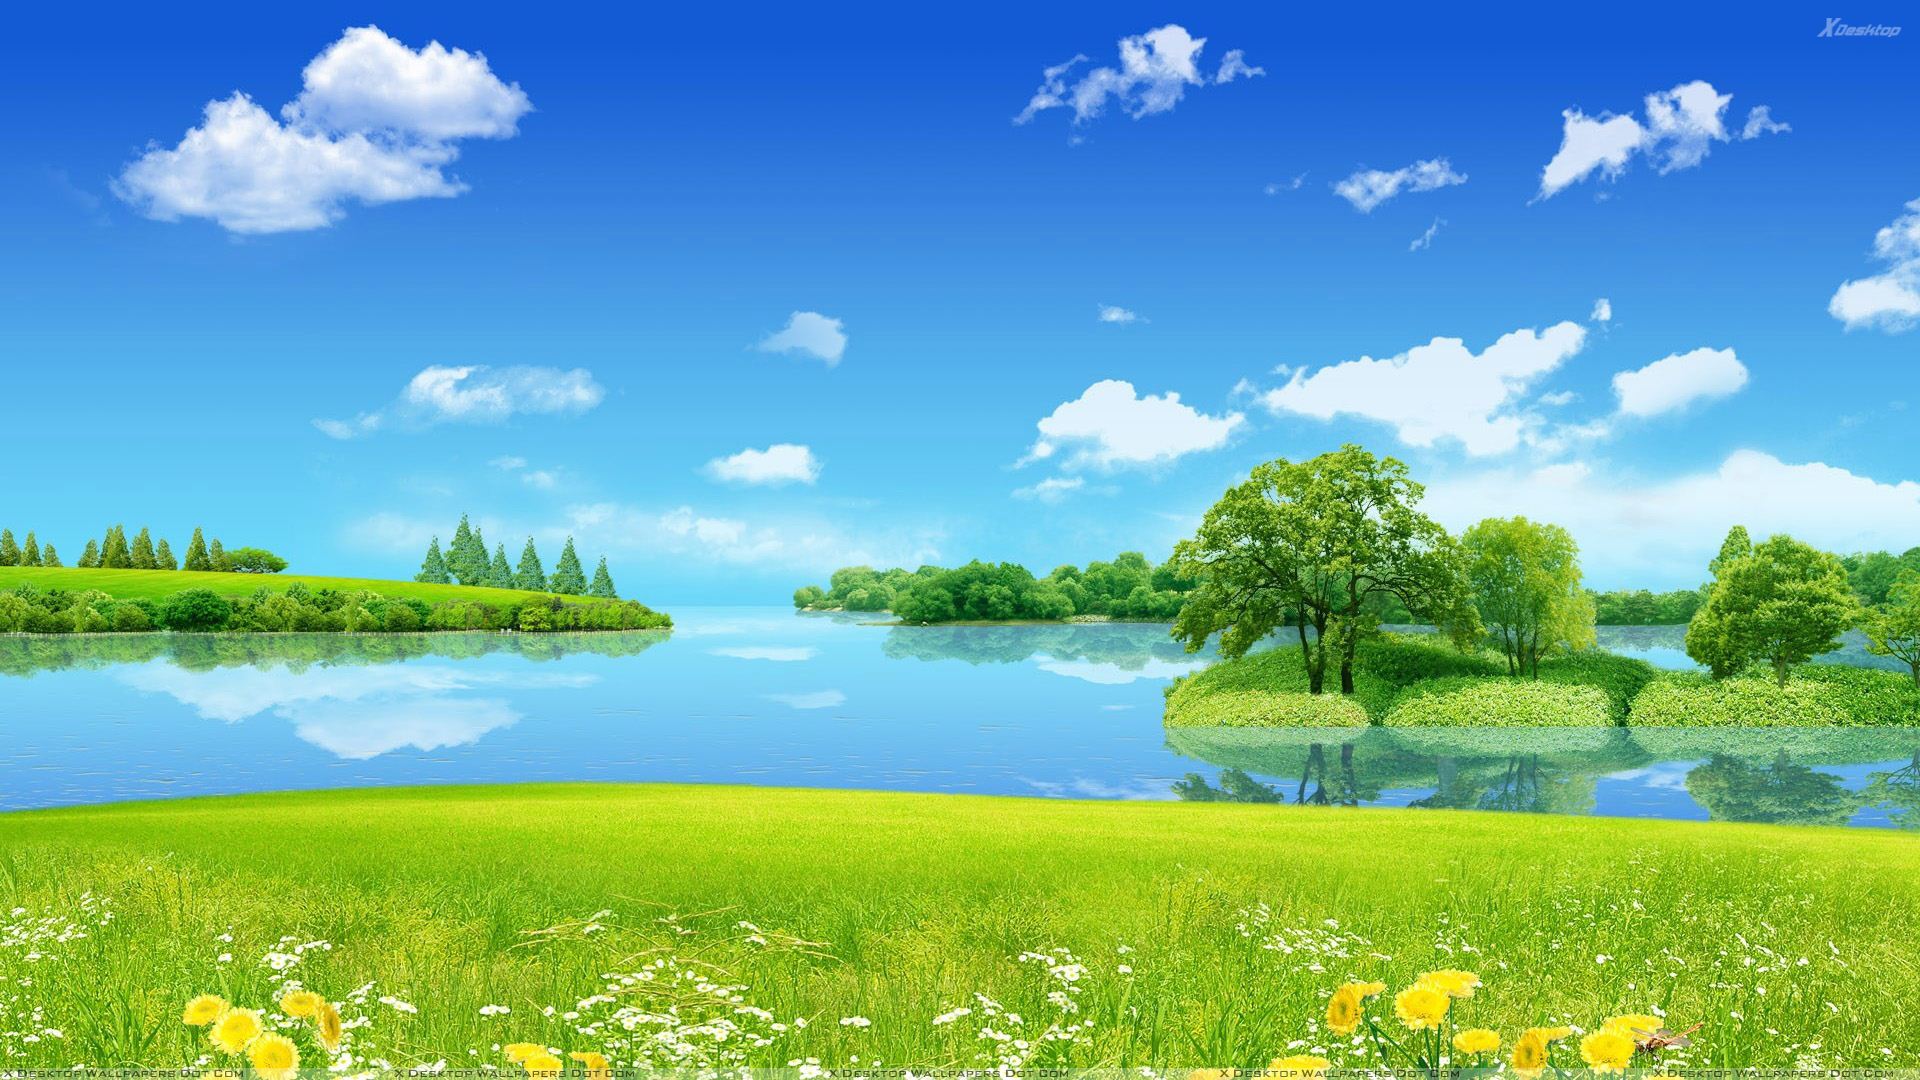 Heavenly Park With Lake In It Wallpaper